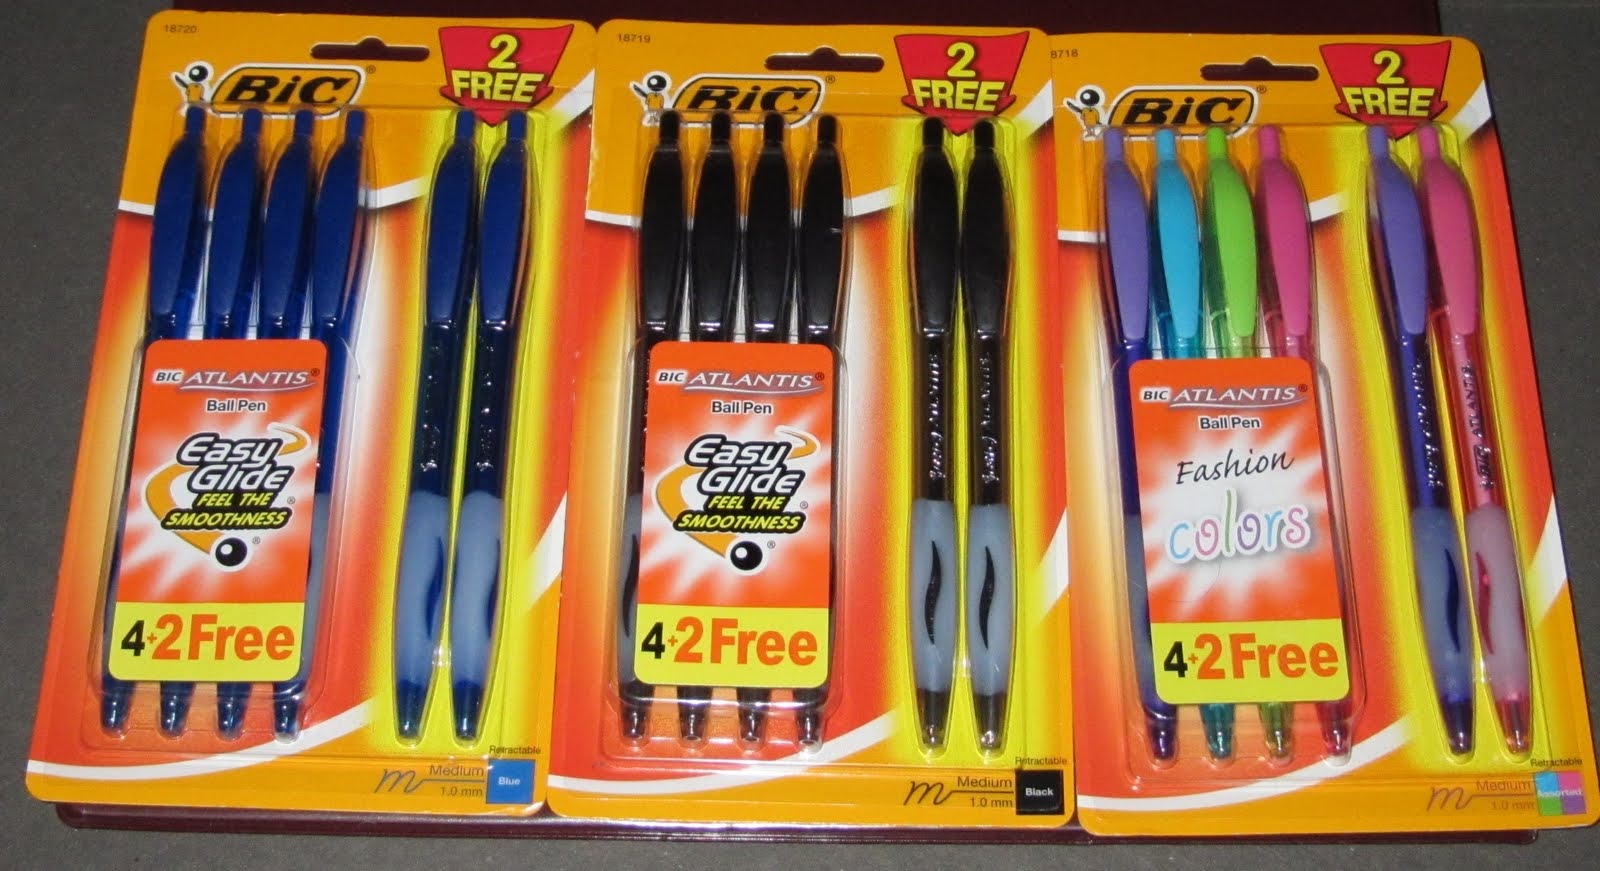 Bic, Edding55, Paper Mate, Ball Pentel: The Good, the Bad and the Ugly ...